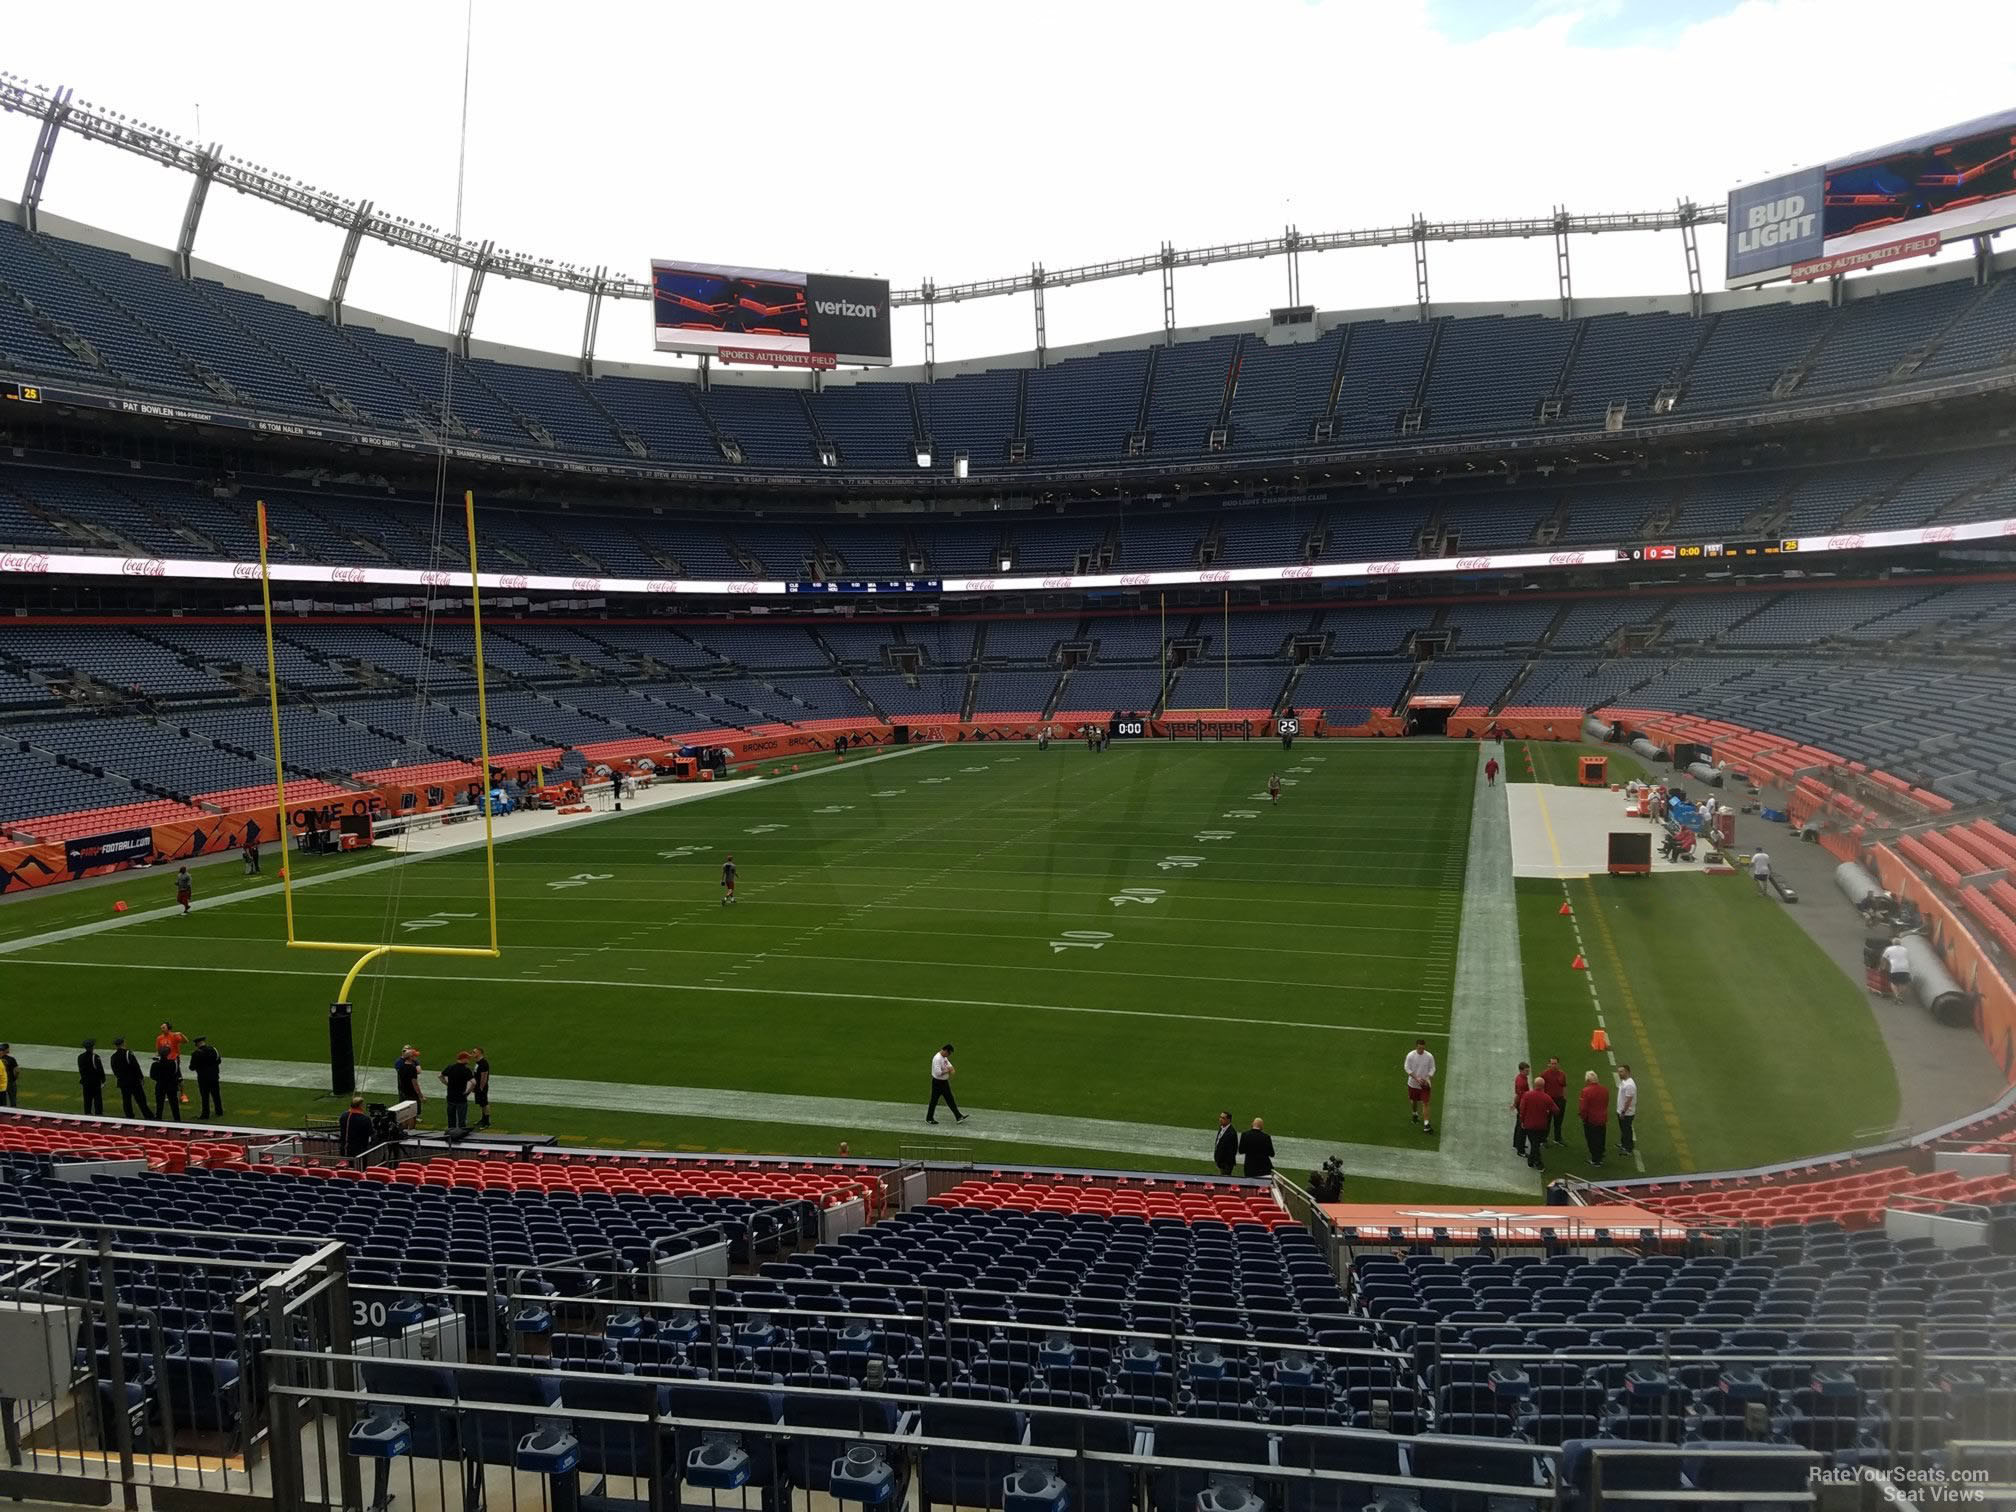 section 130, row 30 seat view  - empower field (at mile high)